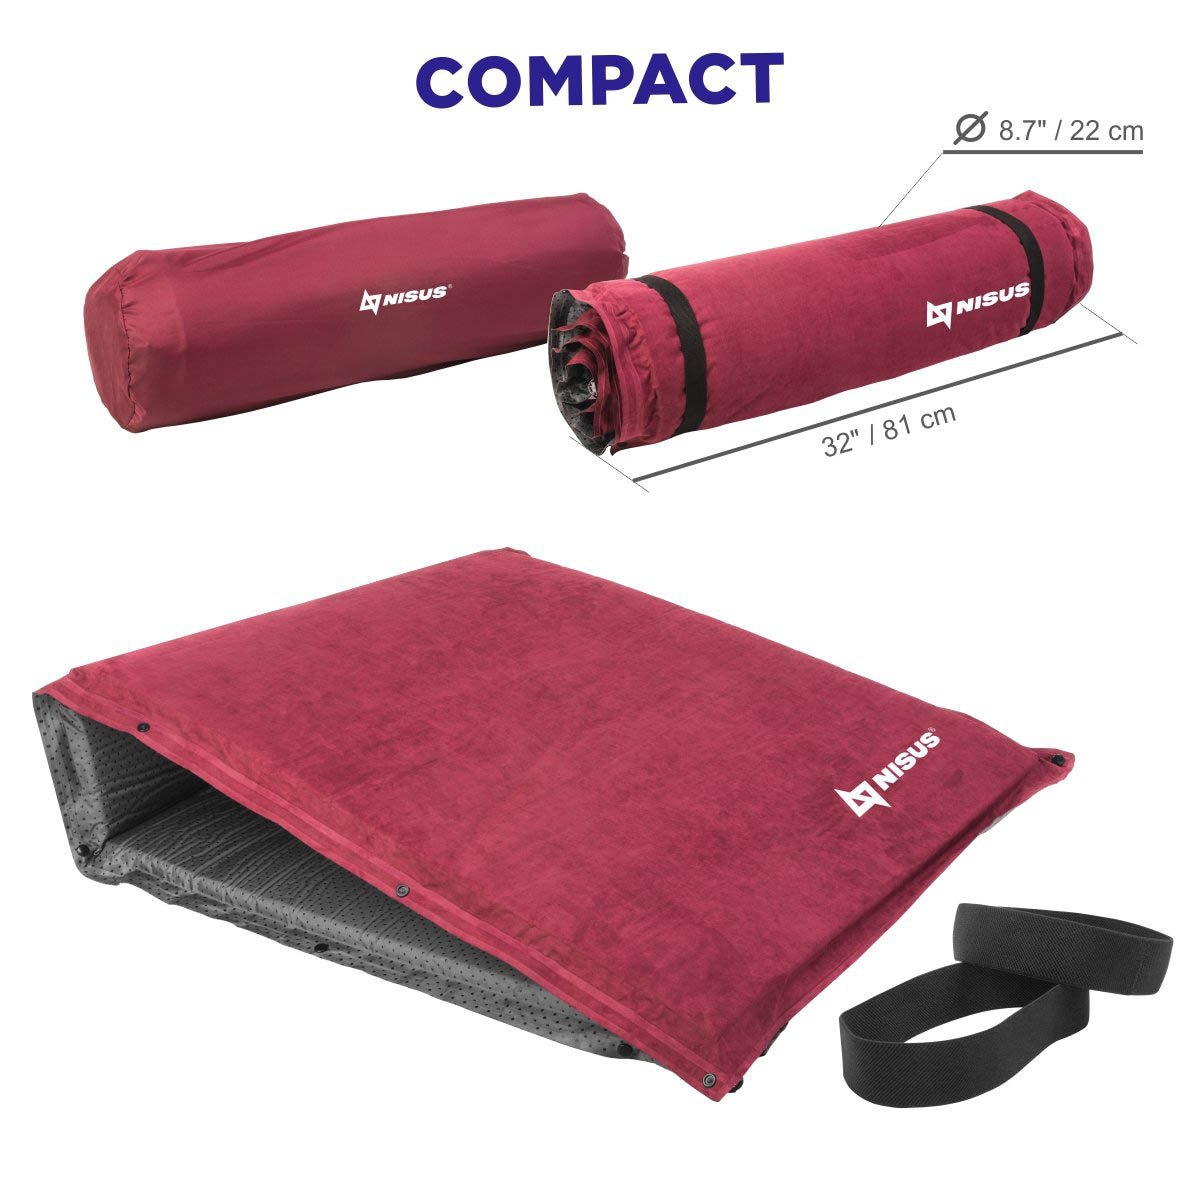 3-inch Self Inflating Camping Sleeping Pad is stored in a travel case